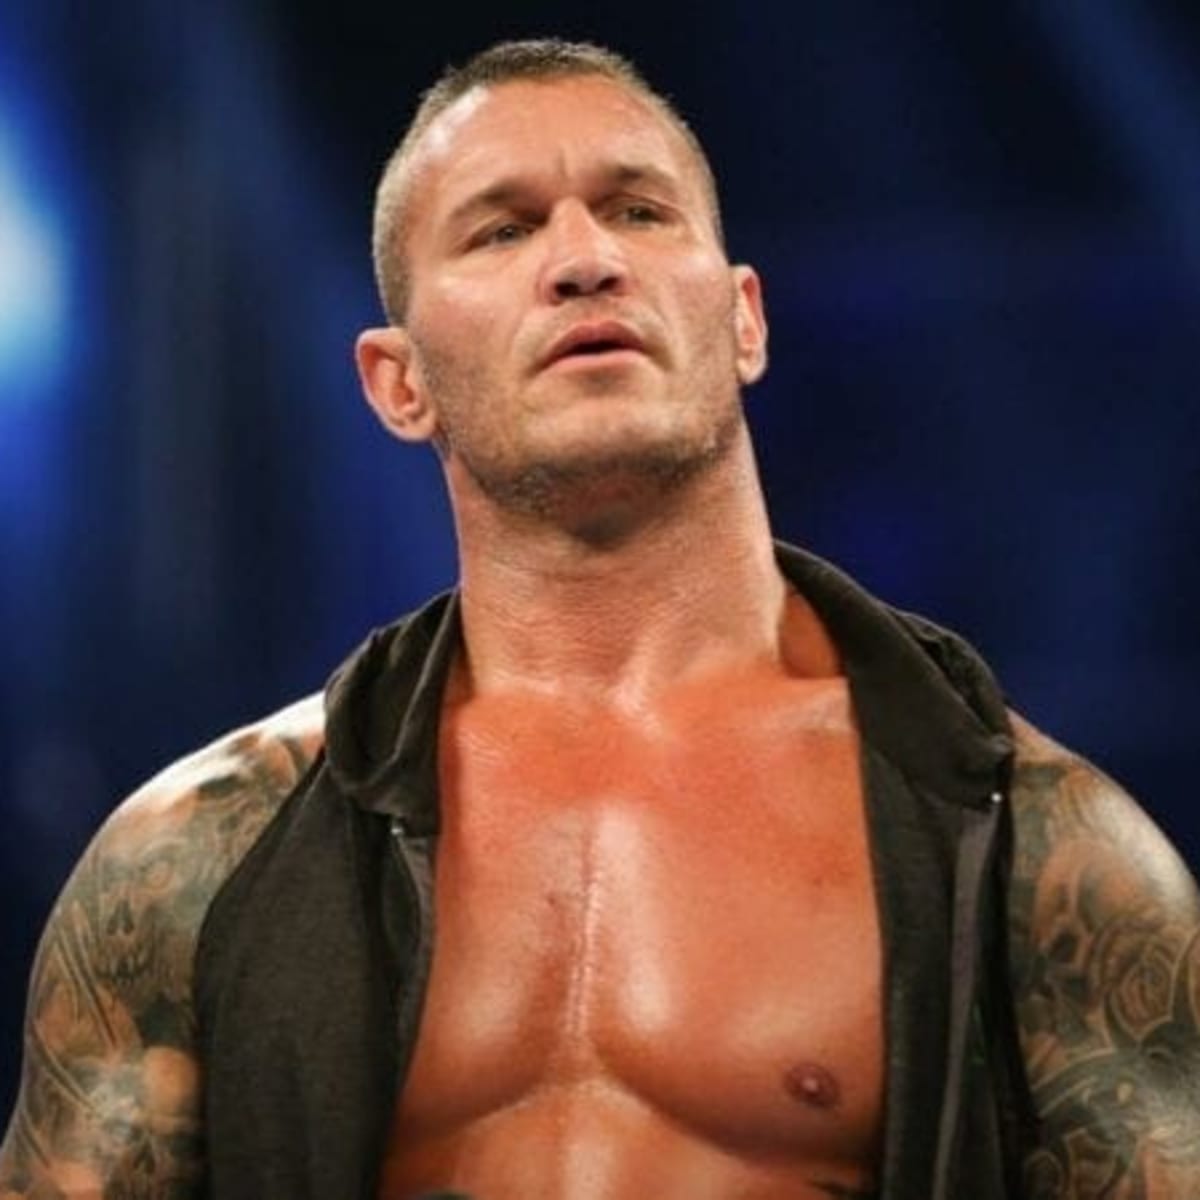 RT @DakotaKaiEra: Per PW Insider: There are plans to bring Randy Orton in for WrestleMania Week in Los Angeles #WWE https://t.co/C5fclbG61z